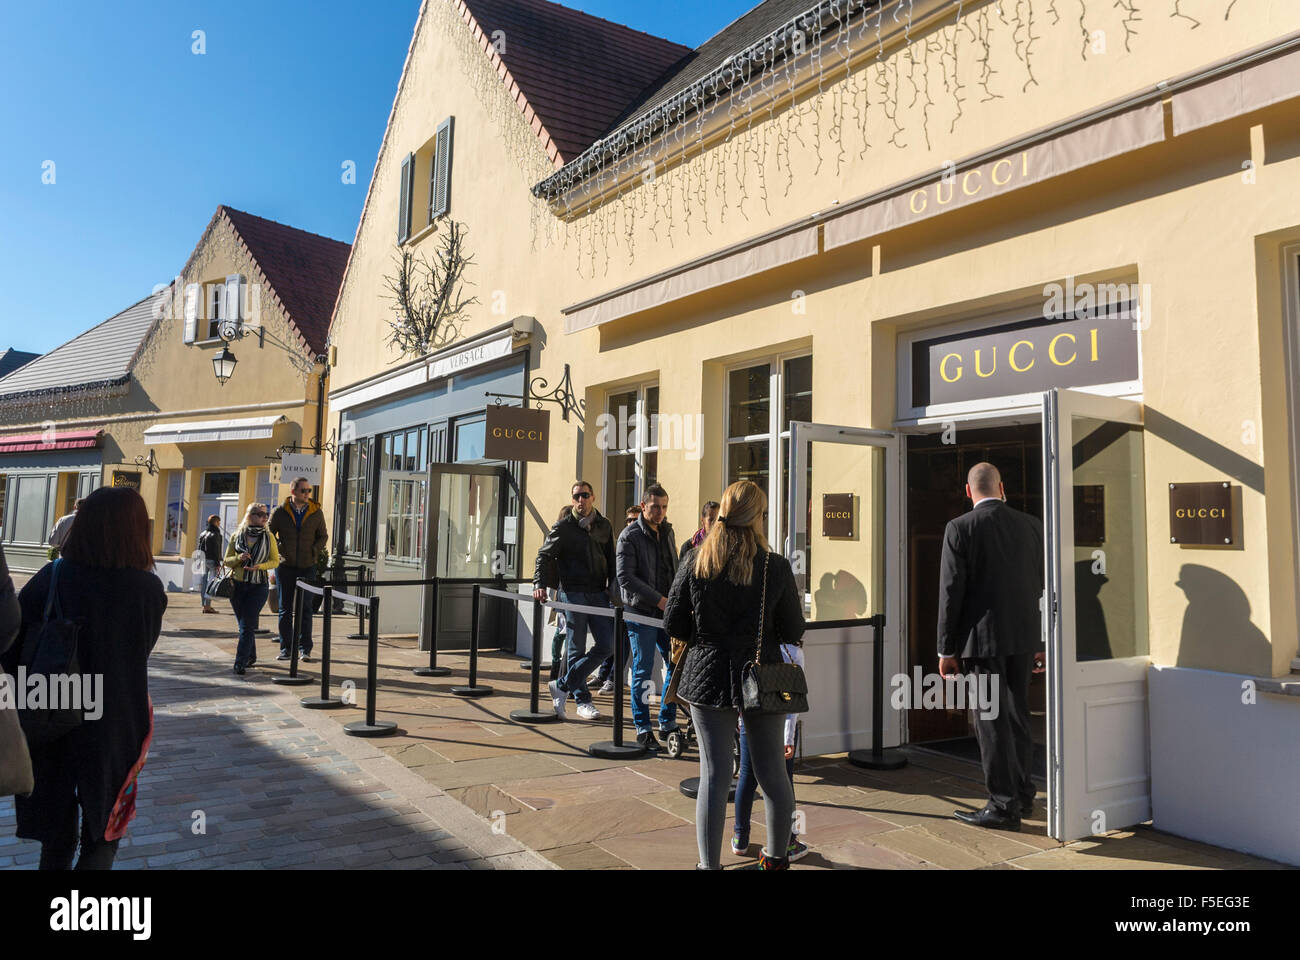 Paris, France, People Shopping in Luxury Stores in "La Vallee Village",  Discount Shops, Street Scene, Gucci Store Front Stock Photo - Alamy